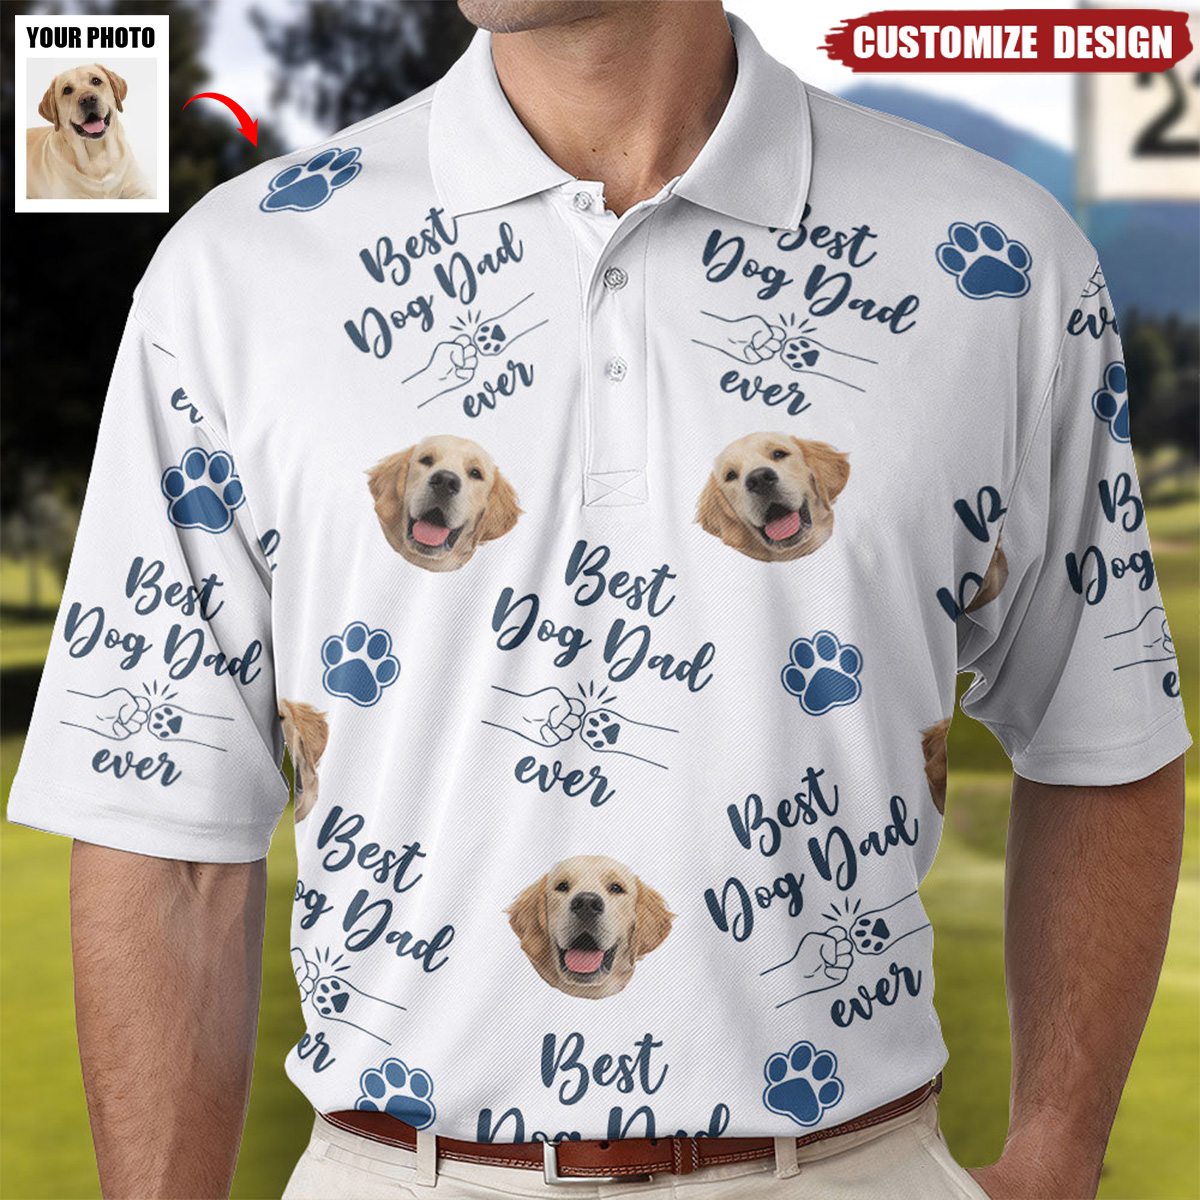 Best Dog Dad Ever - Personalized Photo Polo Shirt